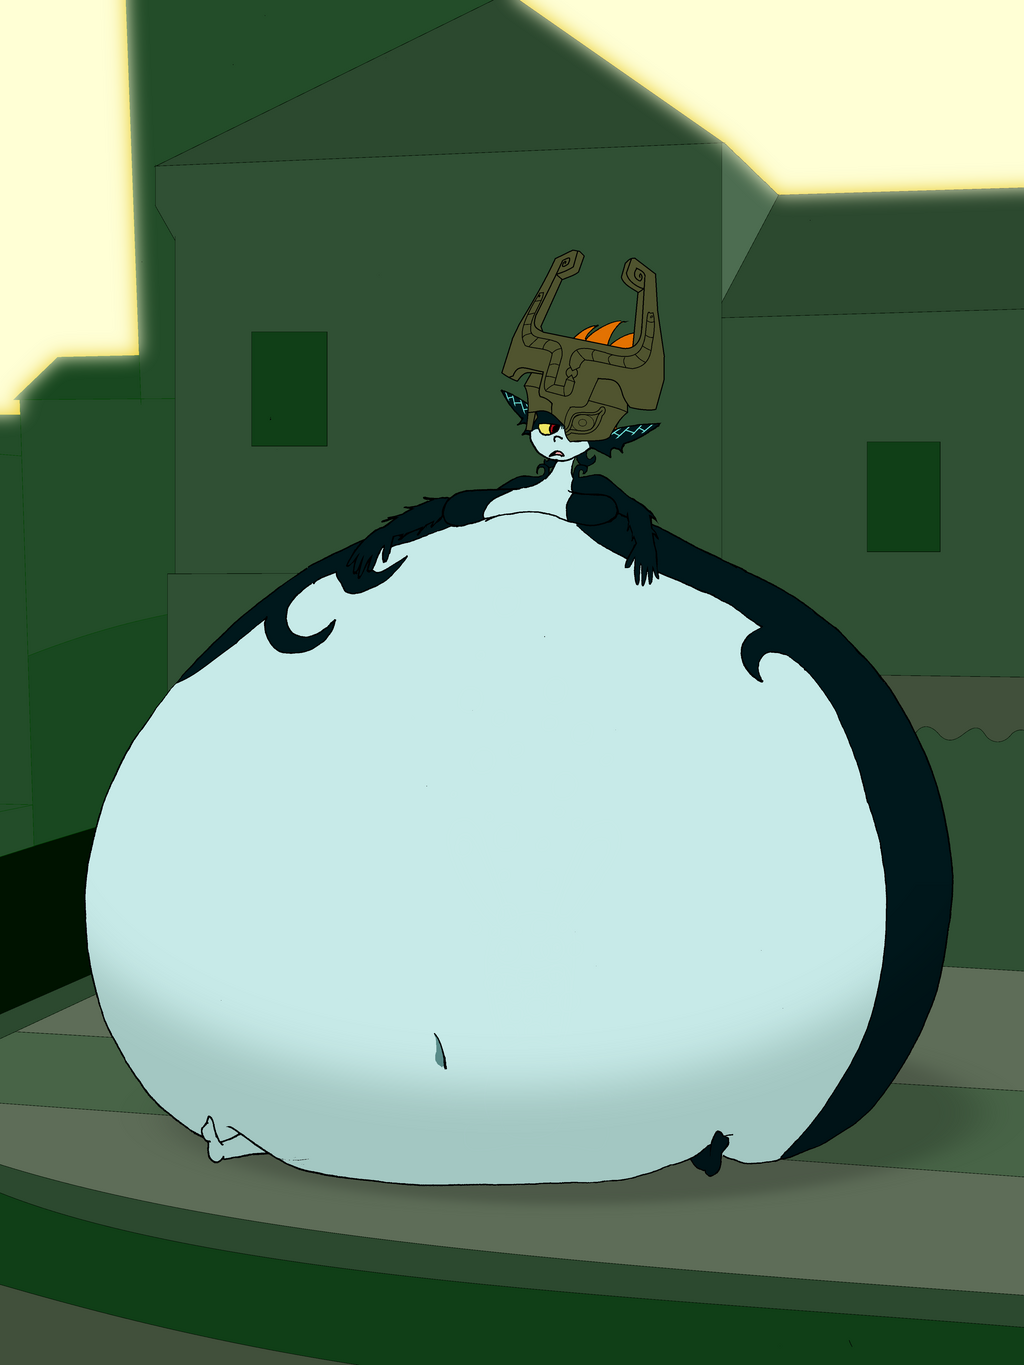 Most recent image: Big, bloated Midna